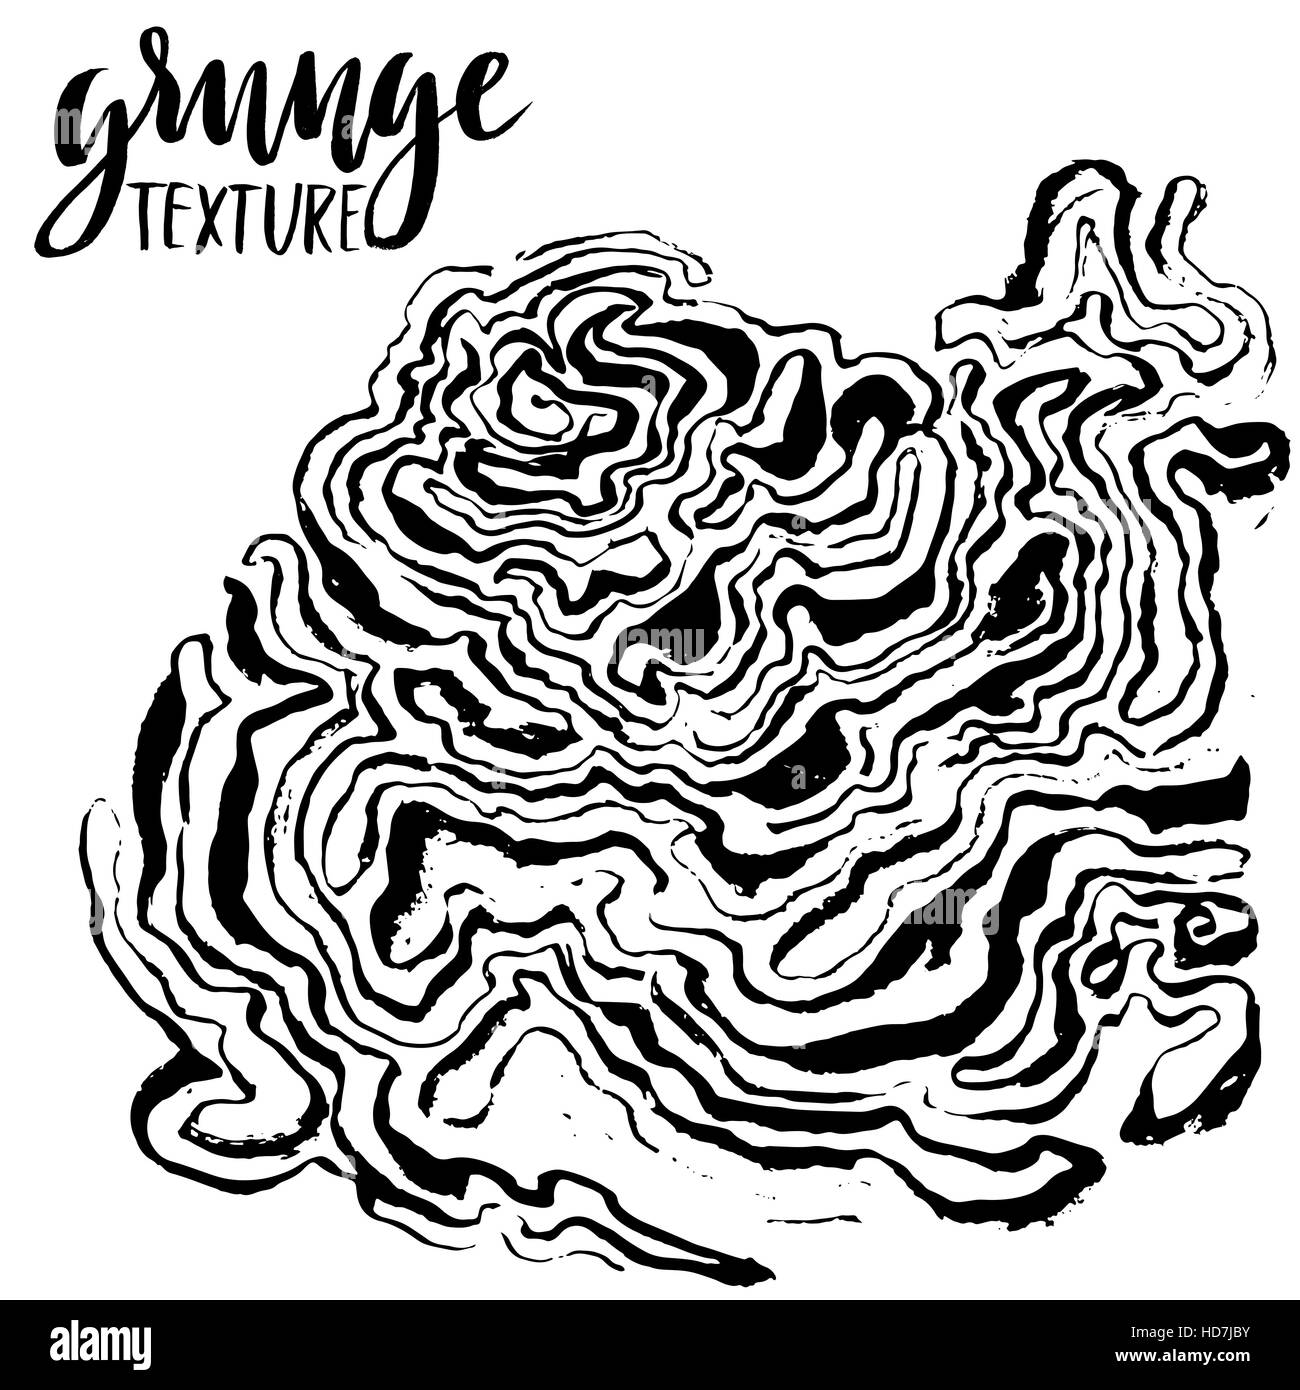 Ink grunge texture. White and black abstract marbling texture. Handmade technique. Stock Vector